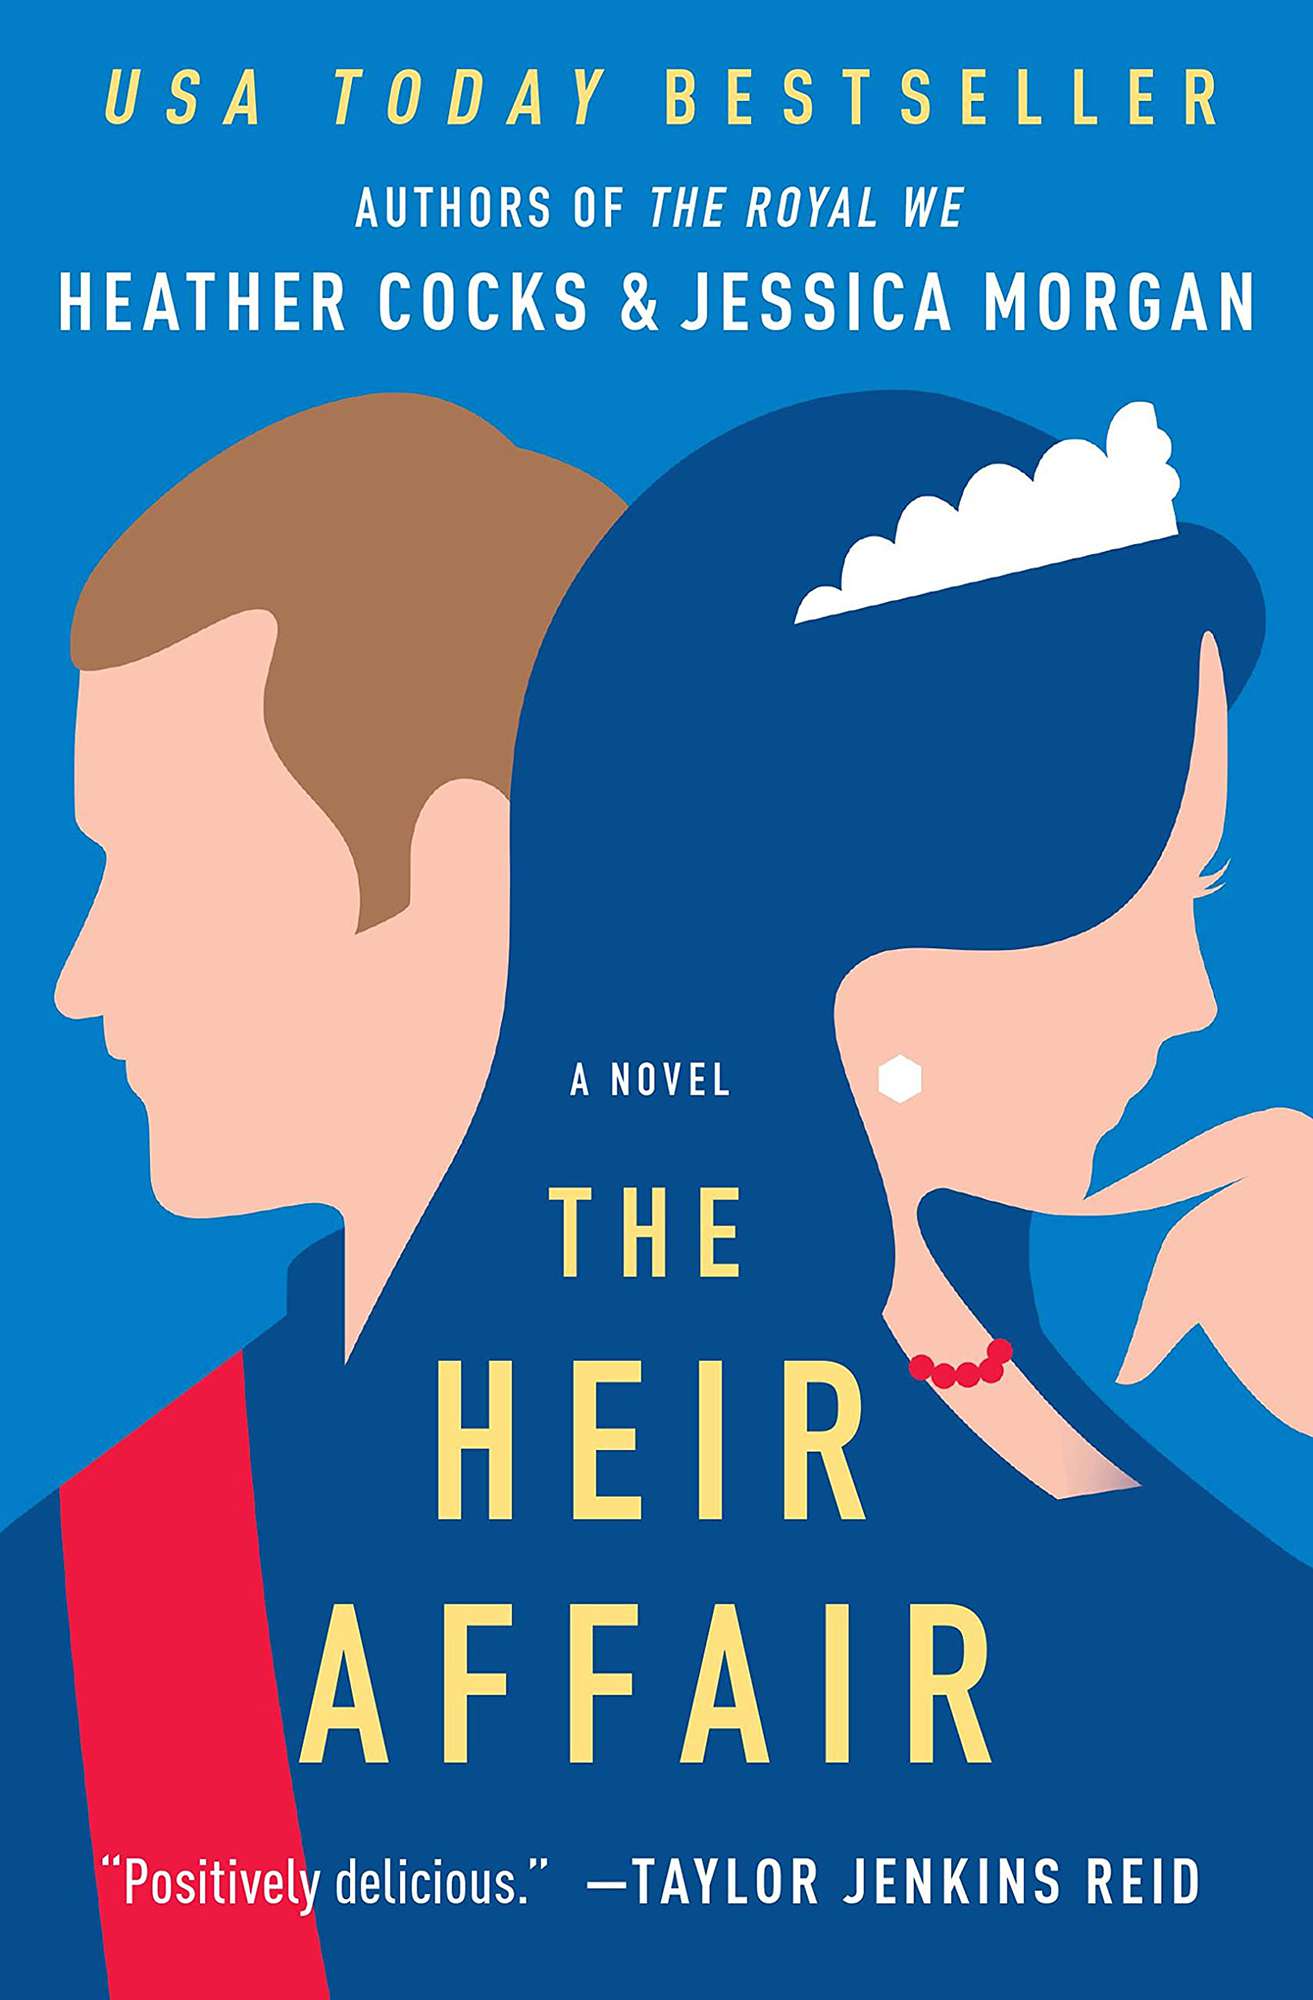 The Heir Affair (The Royal We, 2) Paperback – July 13, 2021 by Heather Cocks (Author), Jessica Morgan